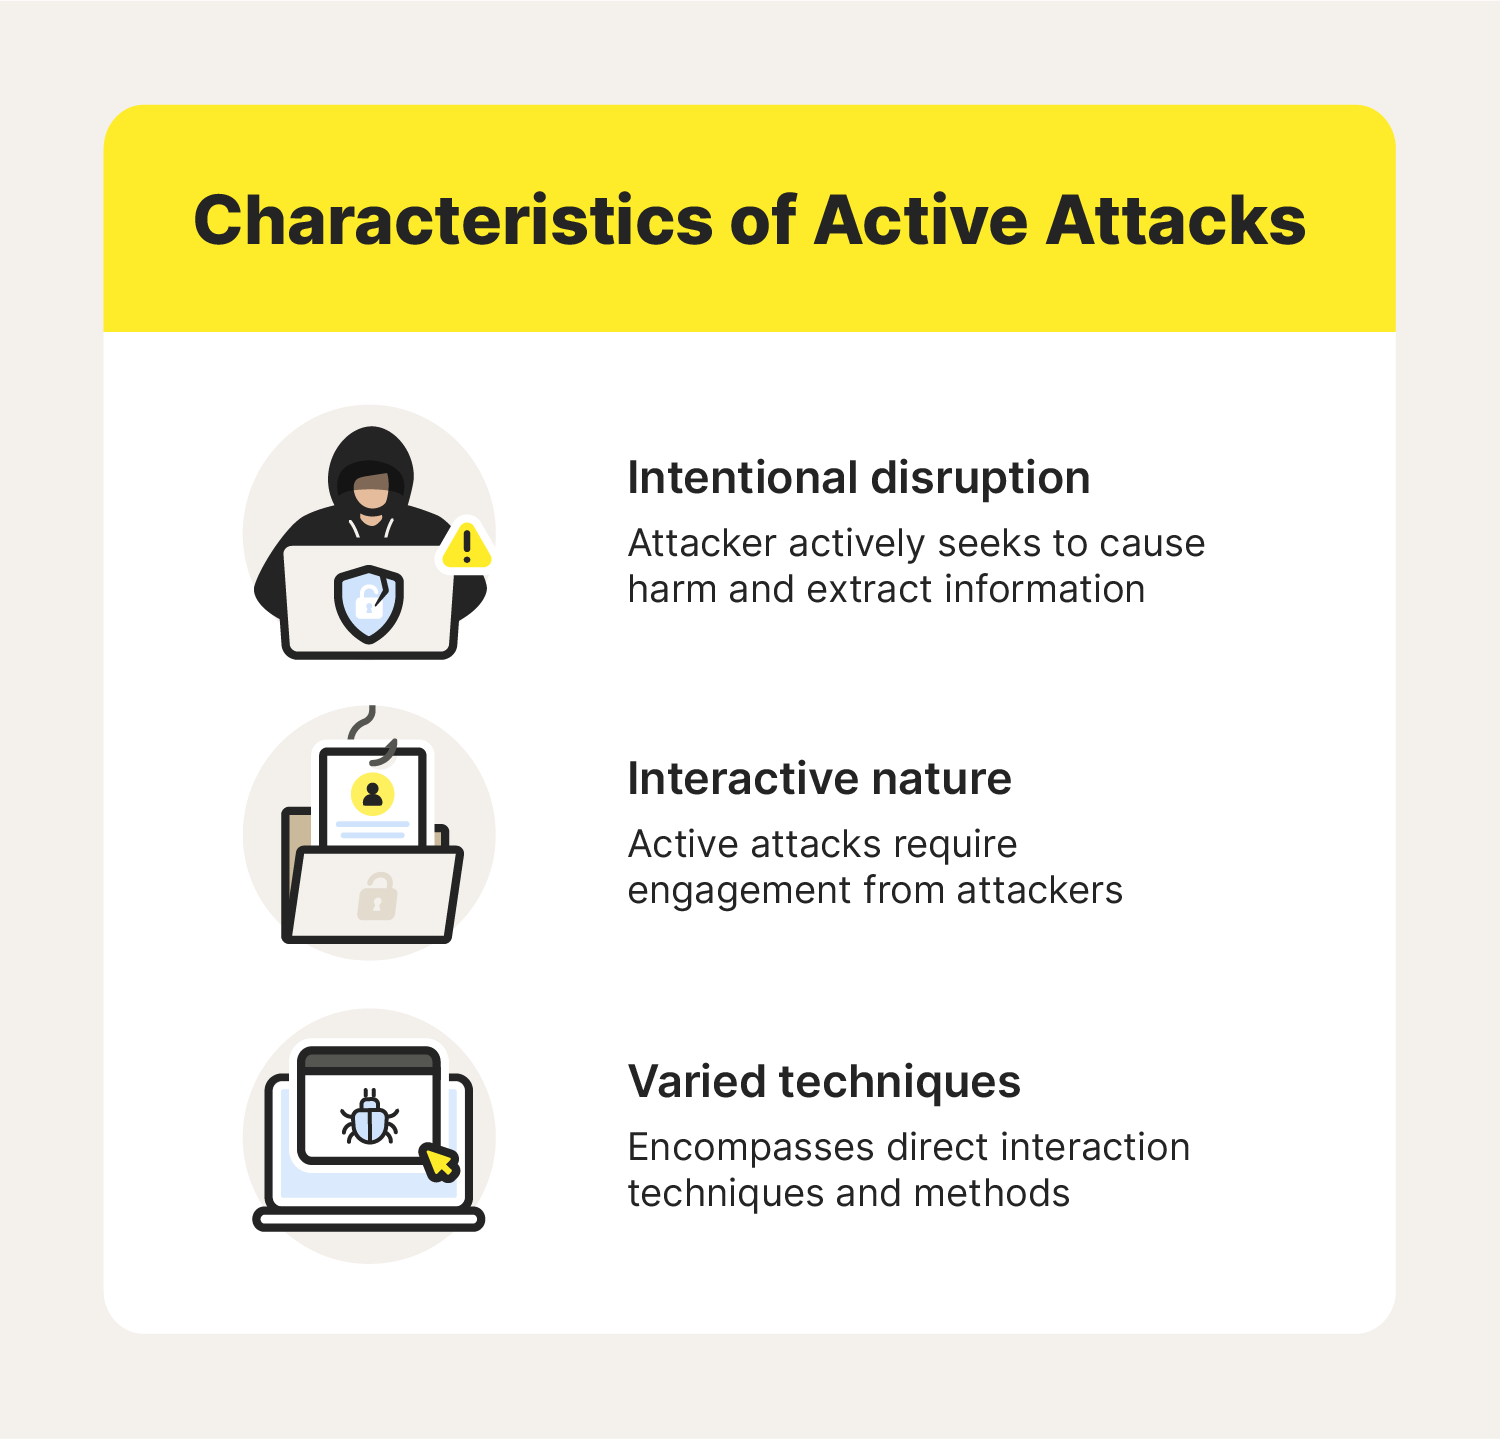 A graphic listing the characteristics of active attacks to educate about attack vectors.